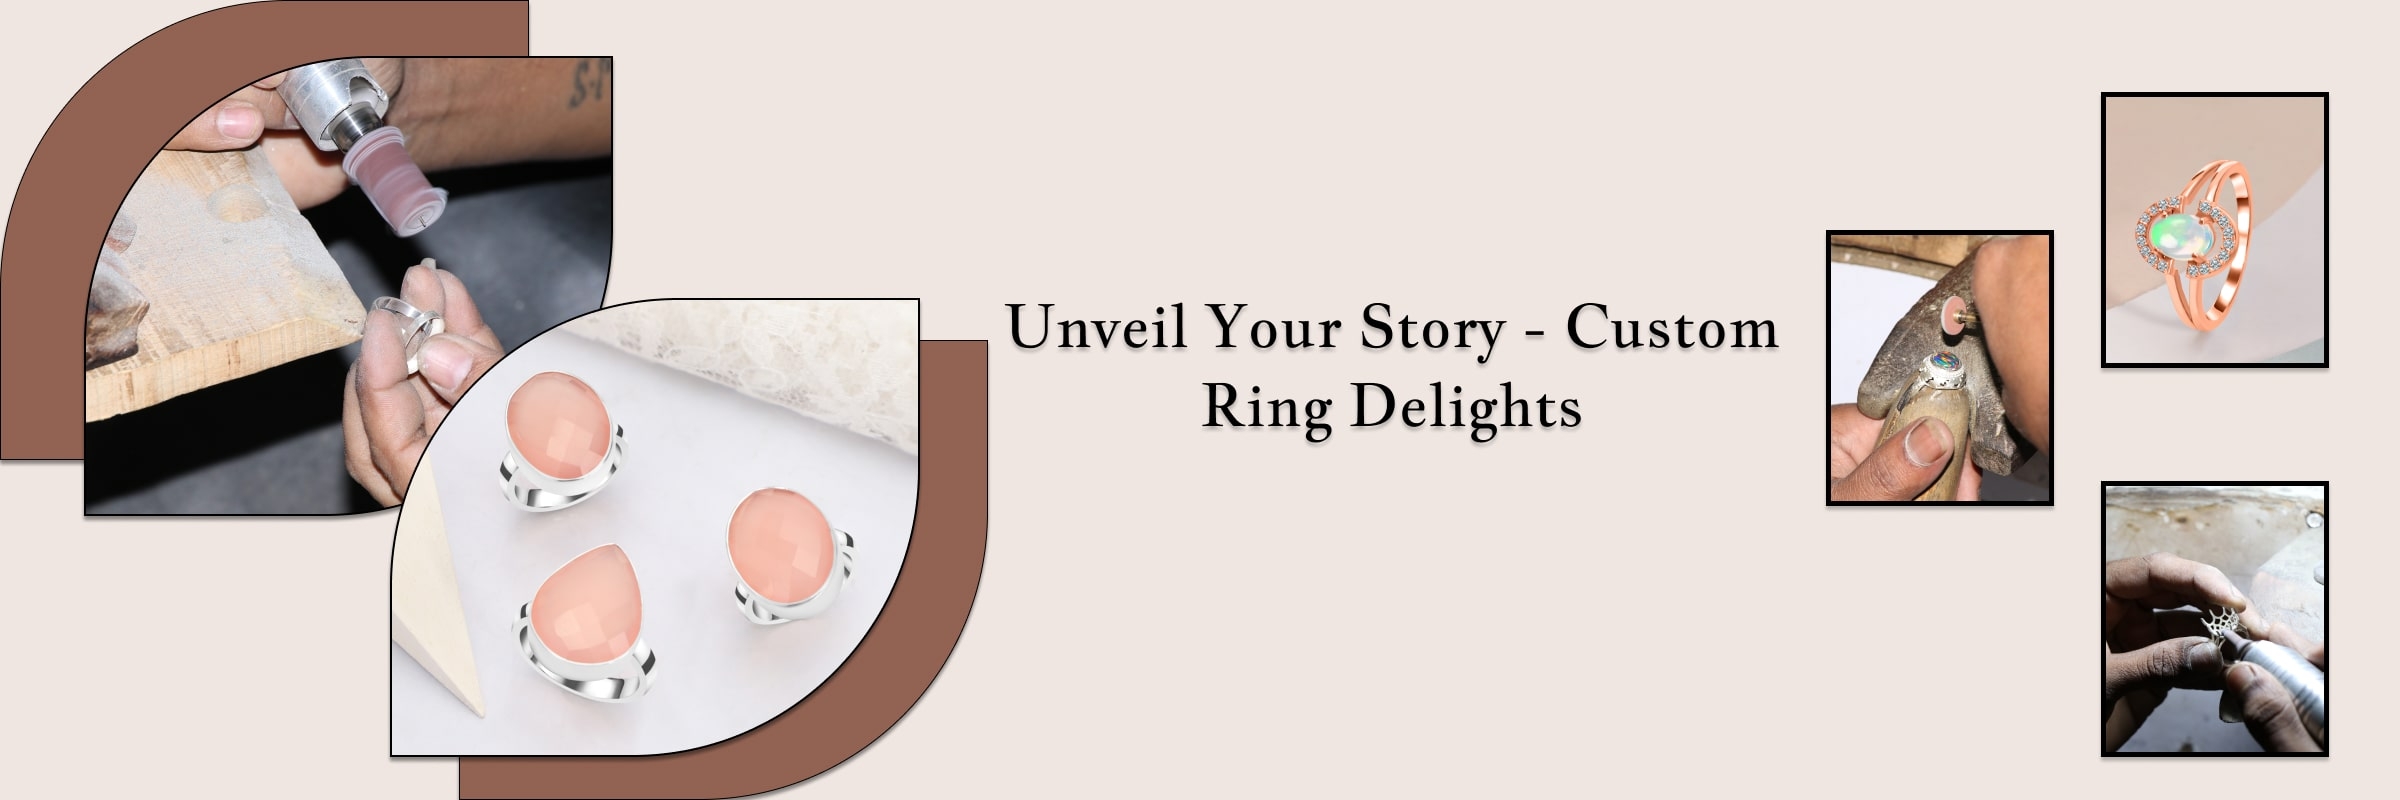 Top 5 Reasons to Get a Customized Engagement Ring